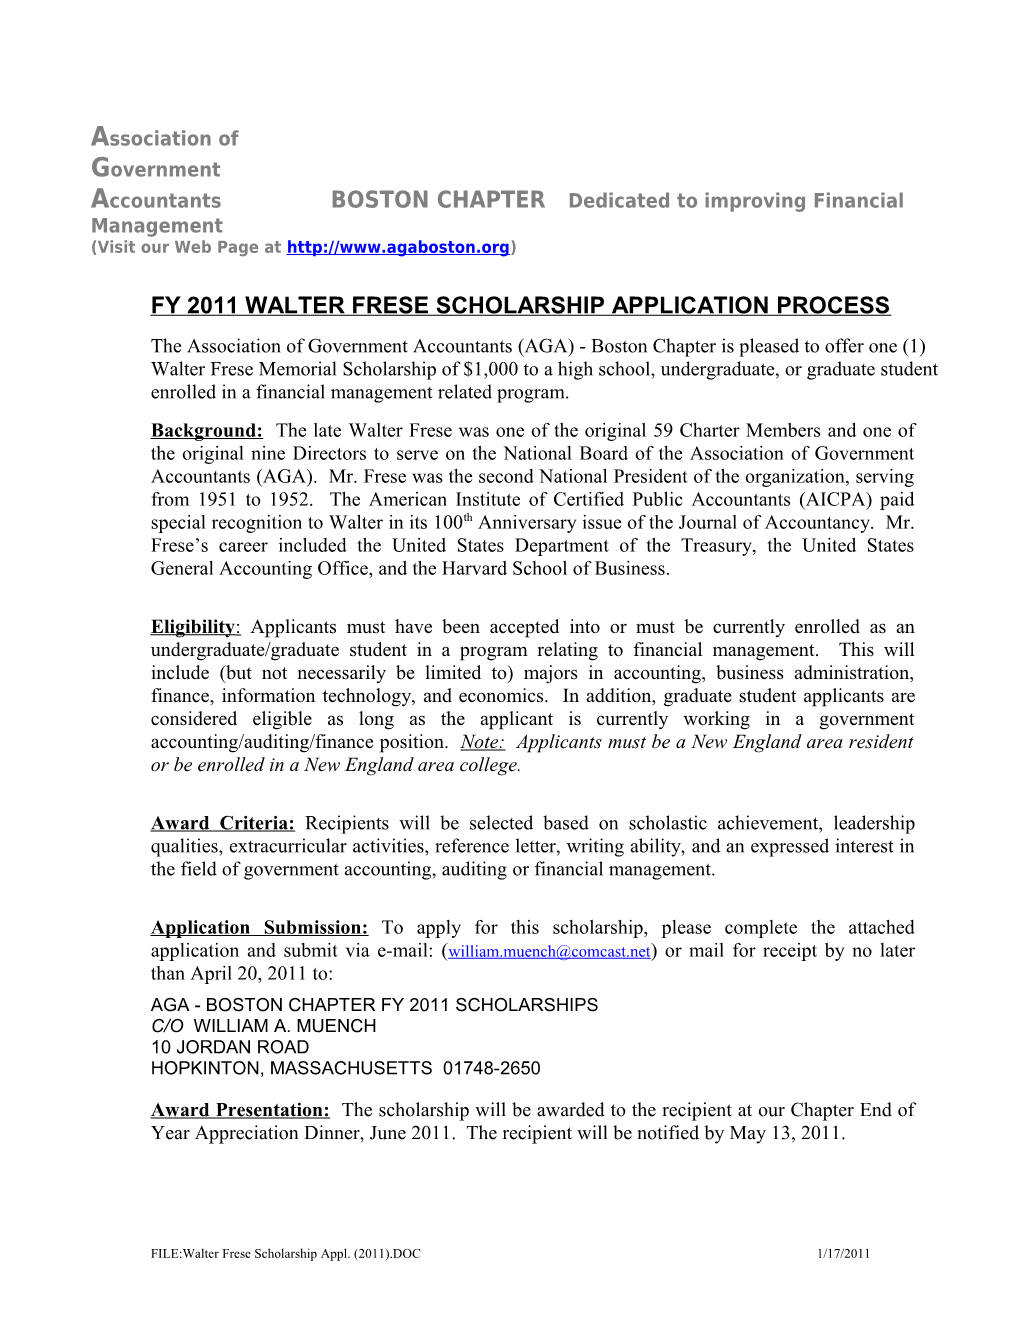 Accountantsboston CHAPTER Dedicated to Improving Financial Management